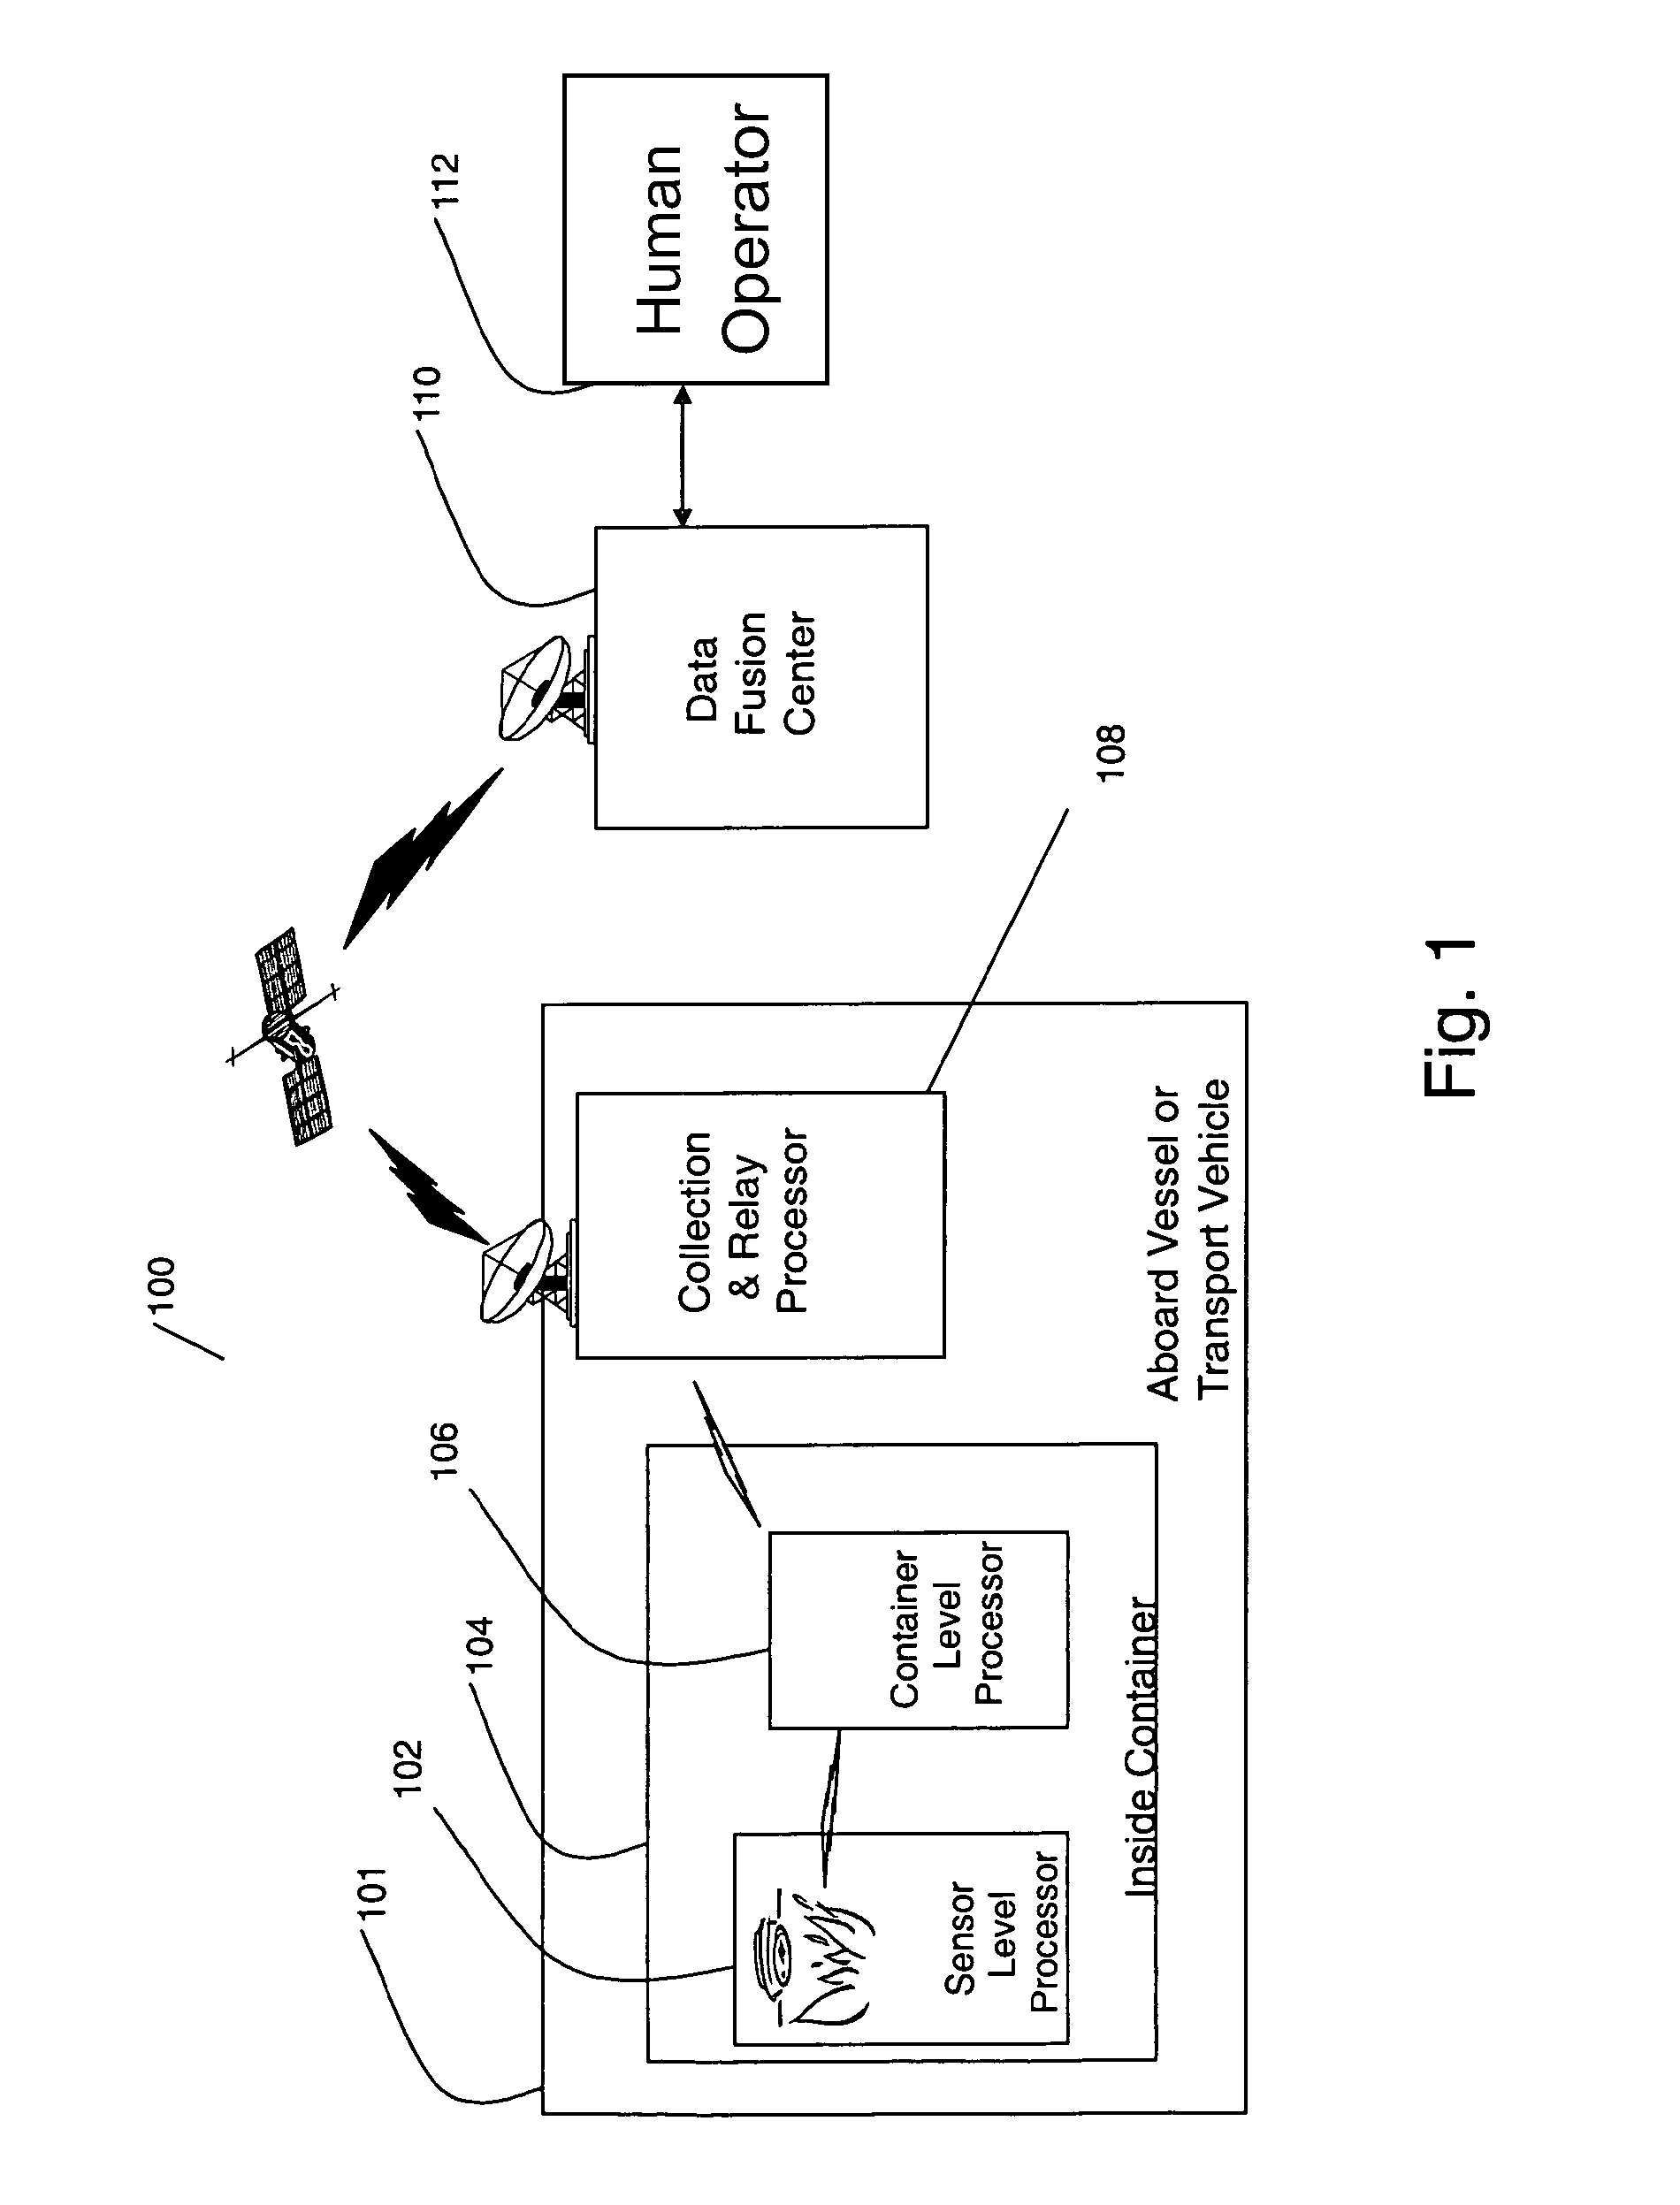 Hierarchical and distributed information processing architecture for a container security system